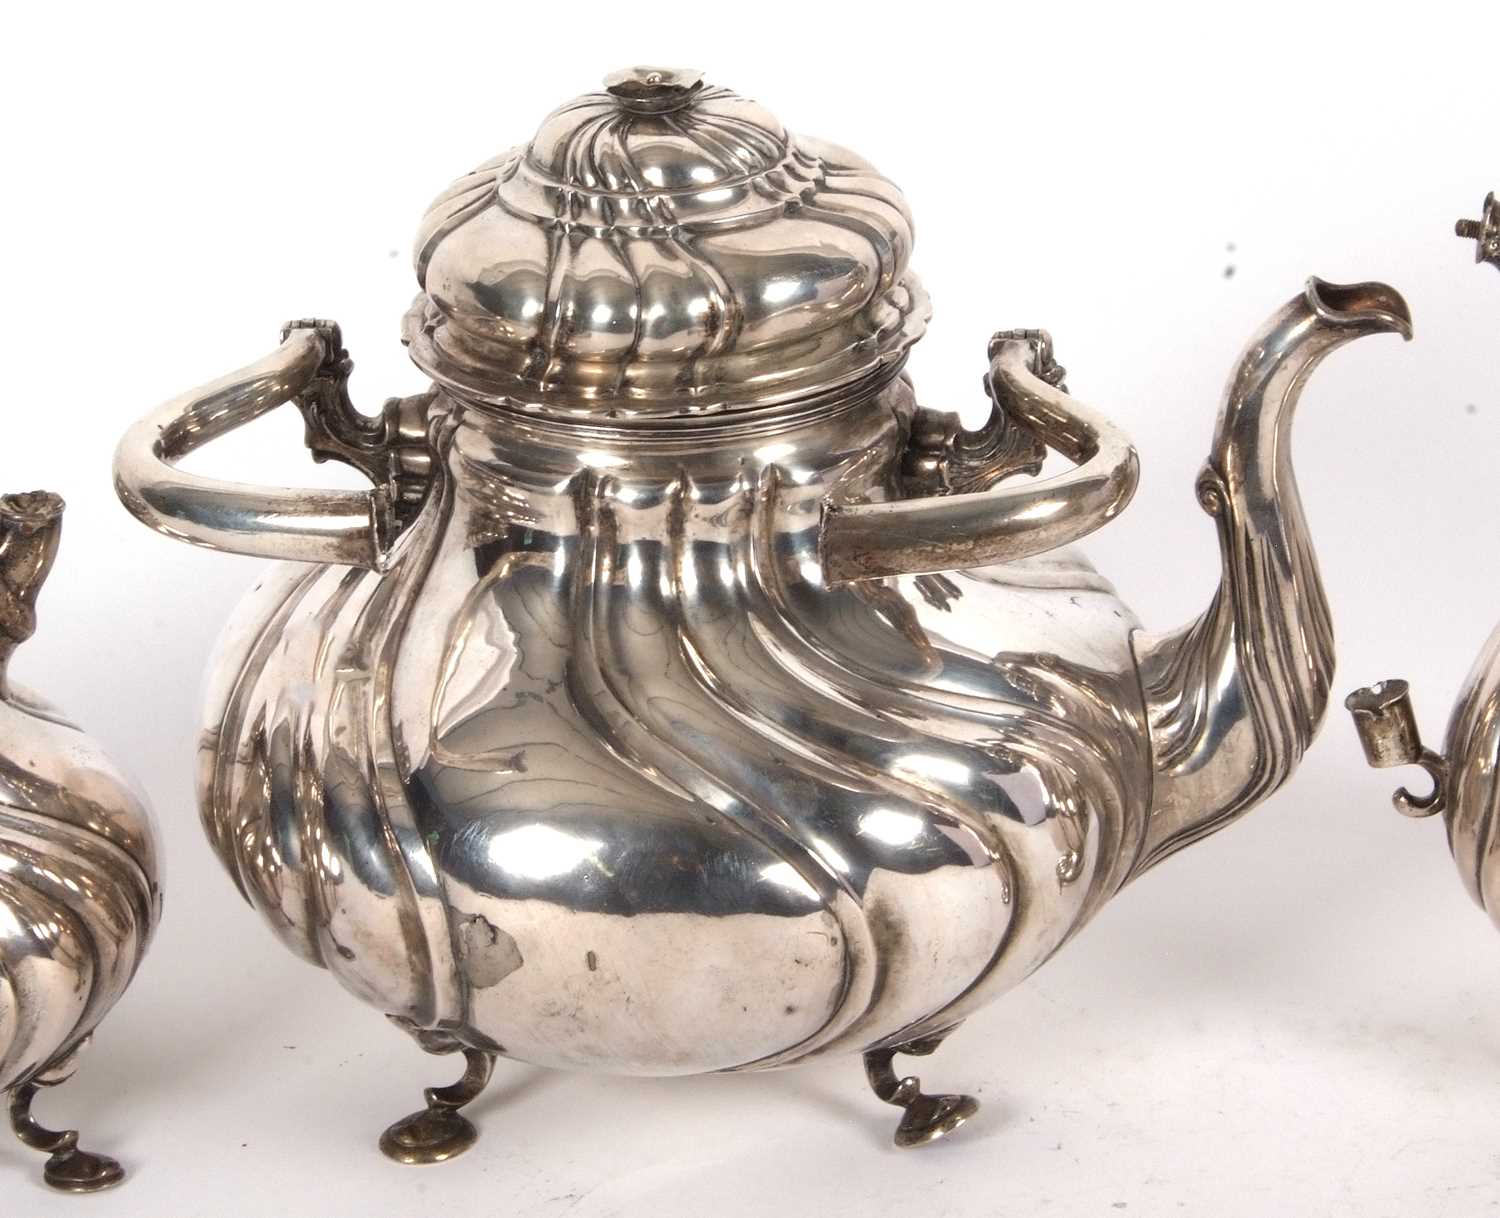 A 19th Century German white metal tea set comprising a large coffee pot, teapot, hot water kettle, - Image 4 of 9